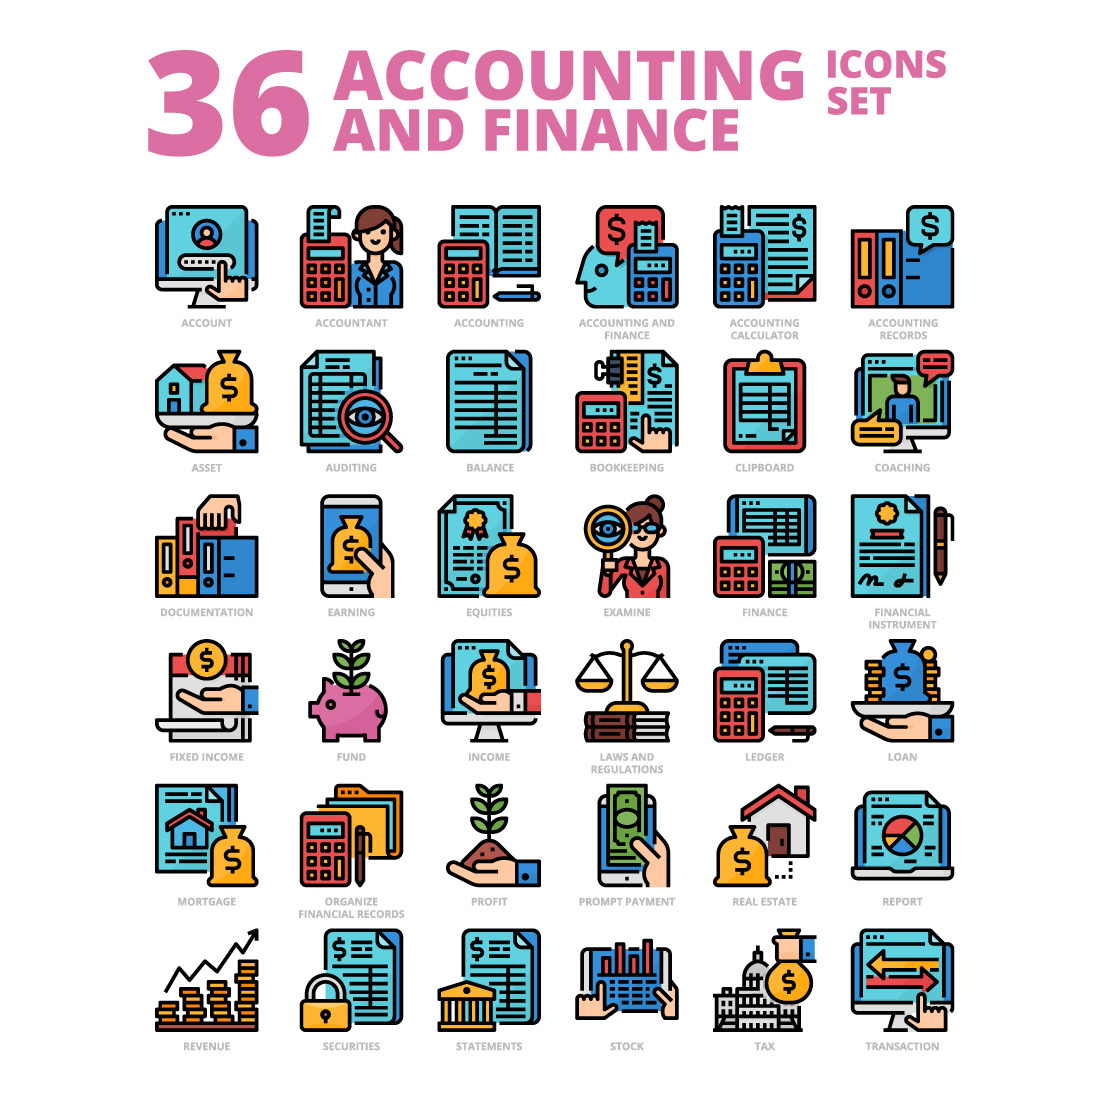 36 Accounting and Finance Icons Set x 4 Styles cover image.